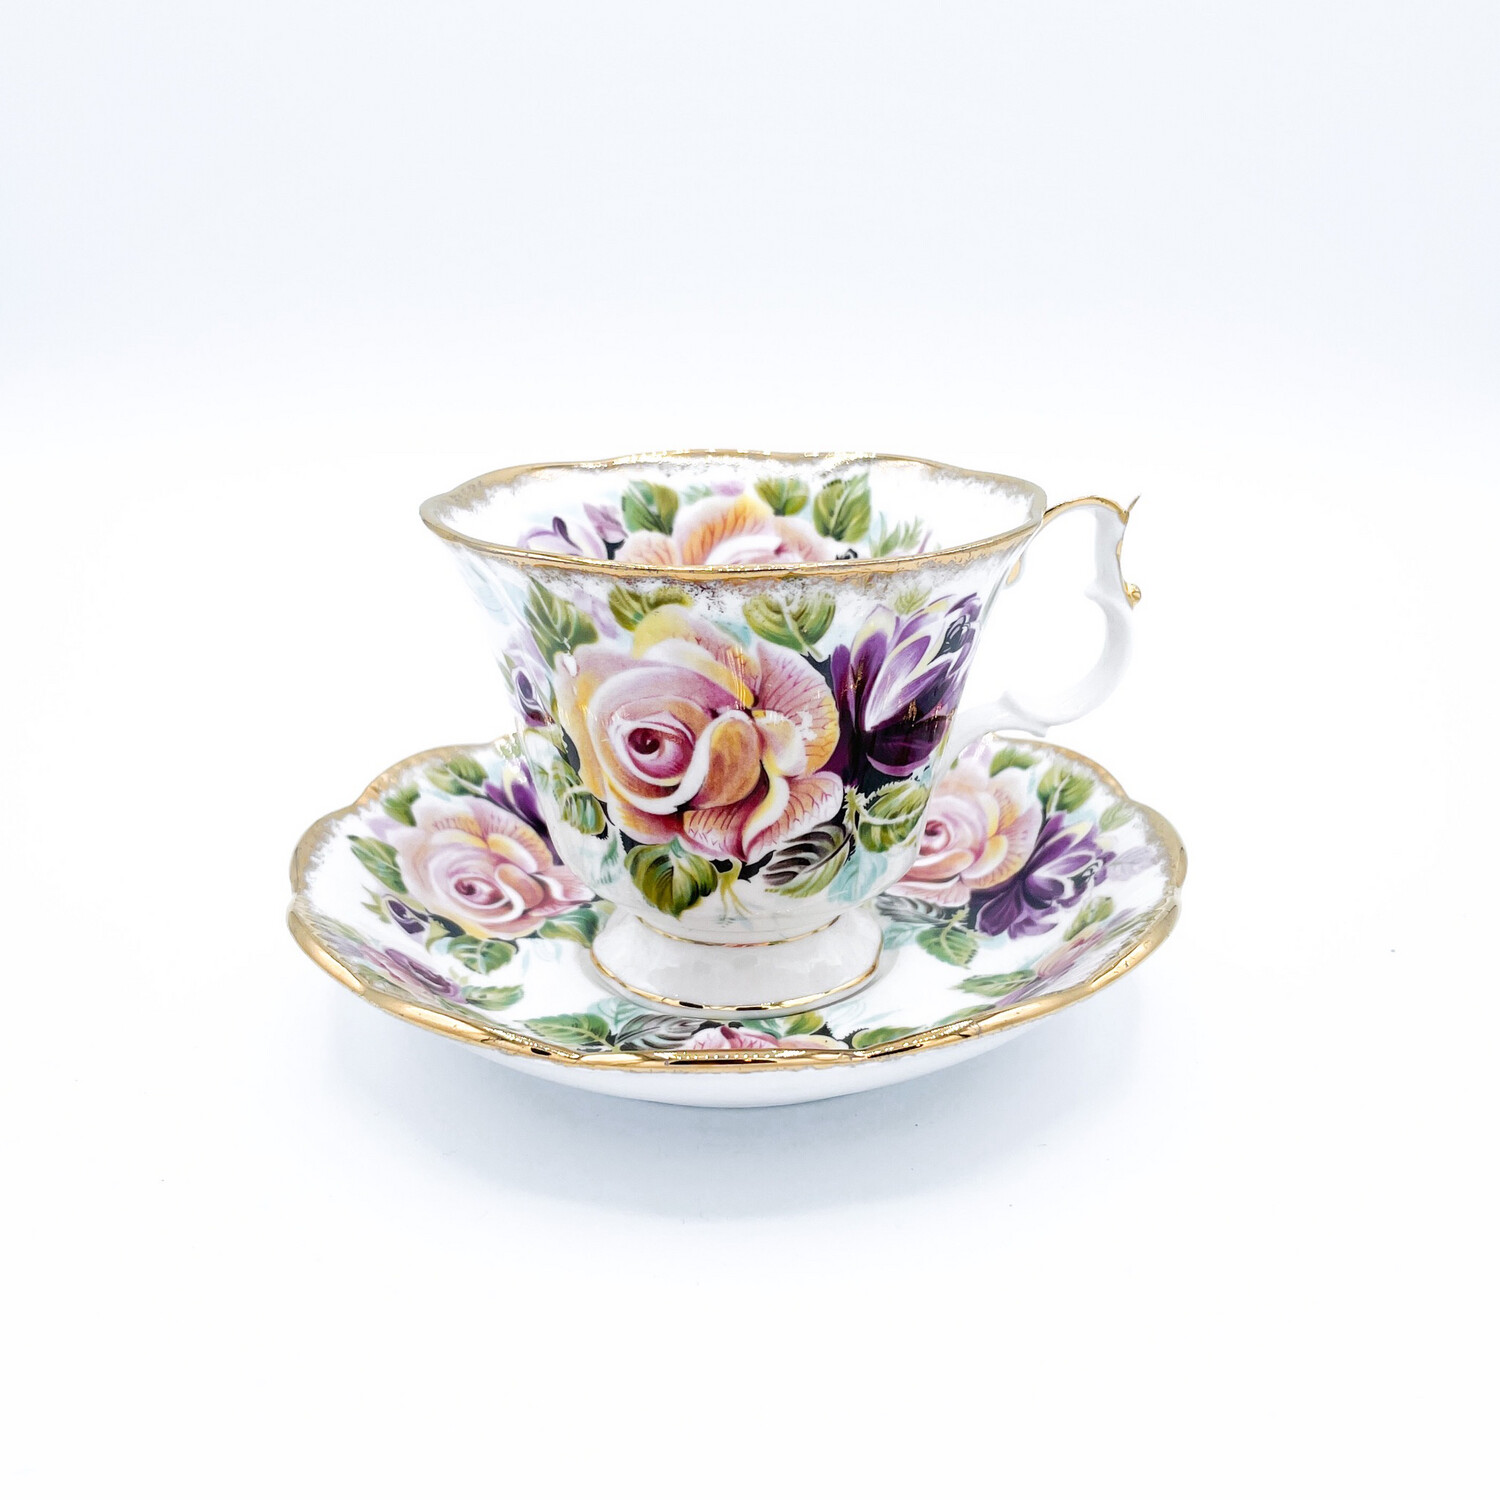 Royal Albert “Amethyst” Cup and Saucer